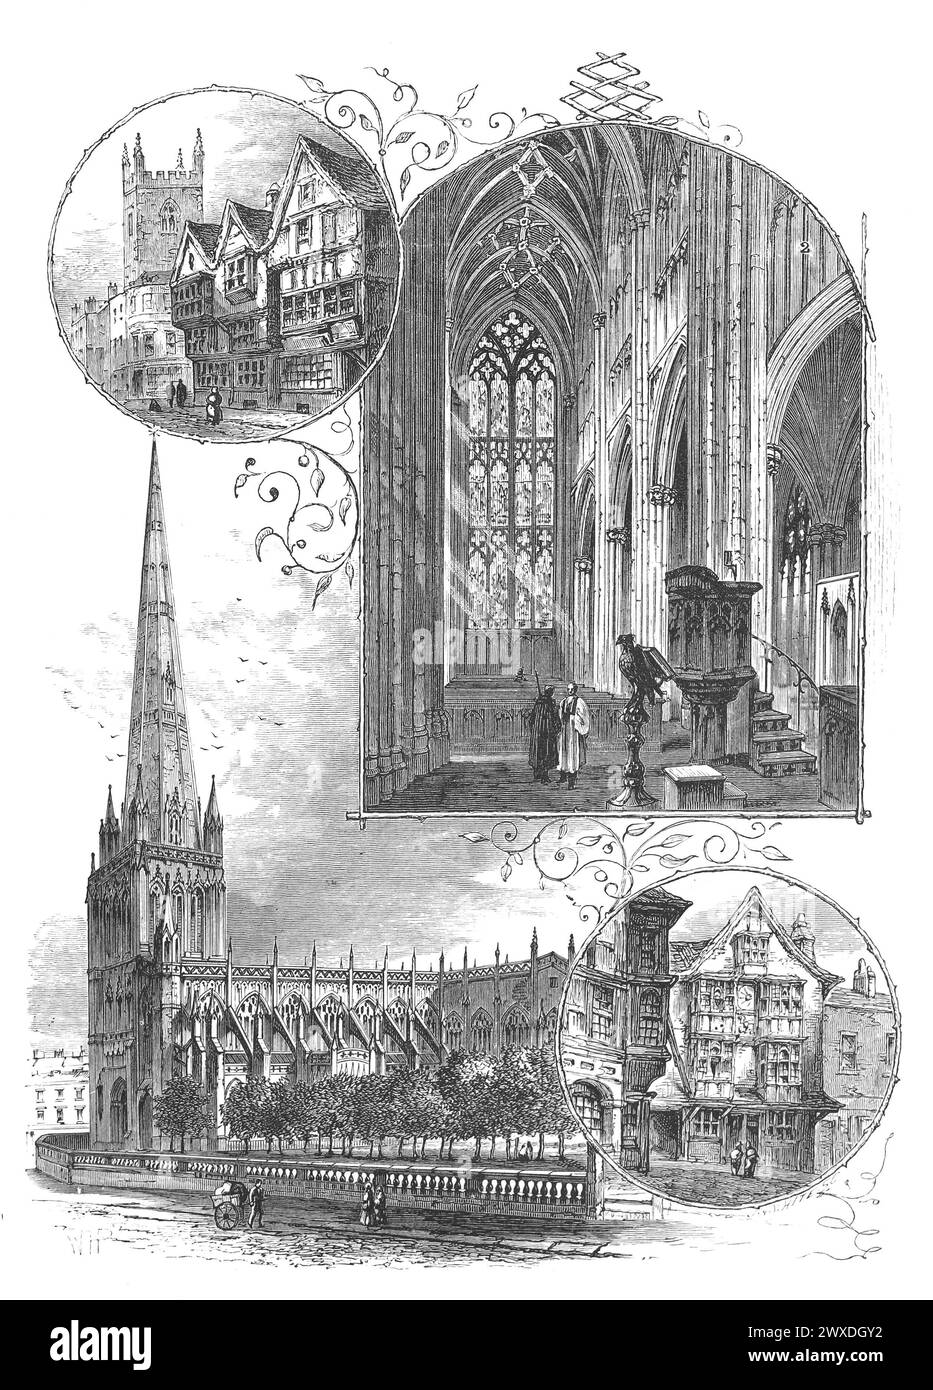 Views in Bristol in the 19th century; Black and White Illustration from the 'Our Own Country' published by Cassell, Petter, Galpin & Co. Late 19th century. Stock Photo